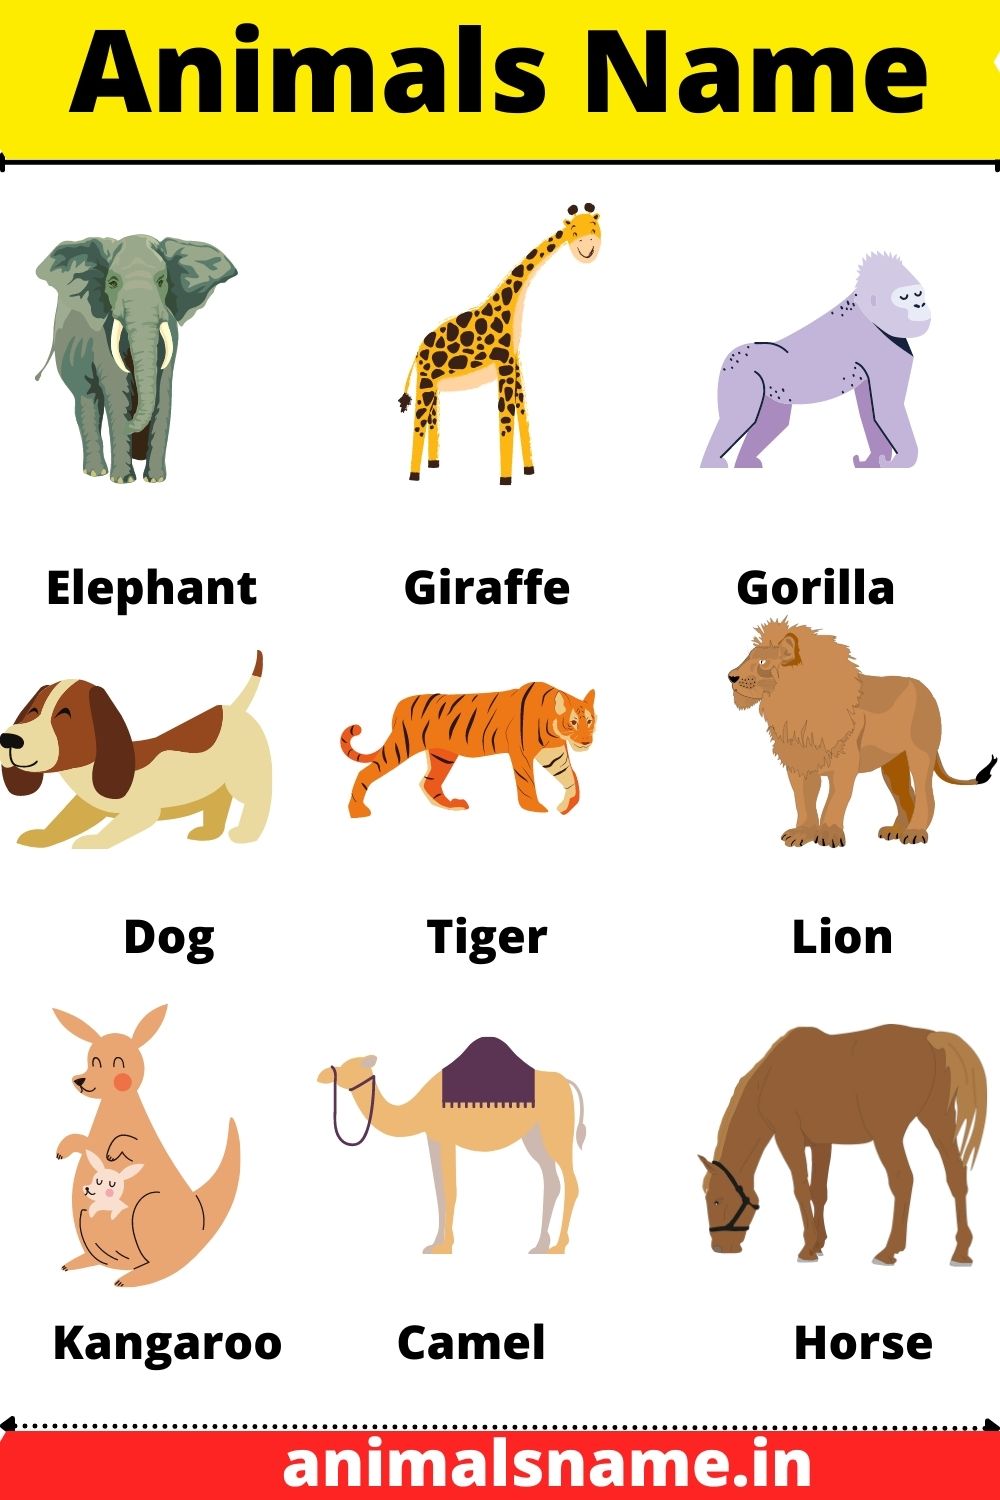 100+ Animals Name in English With Picture